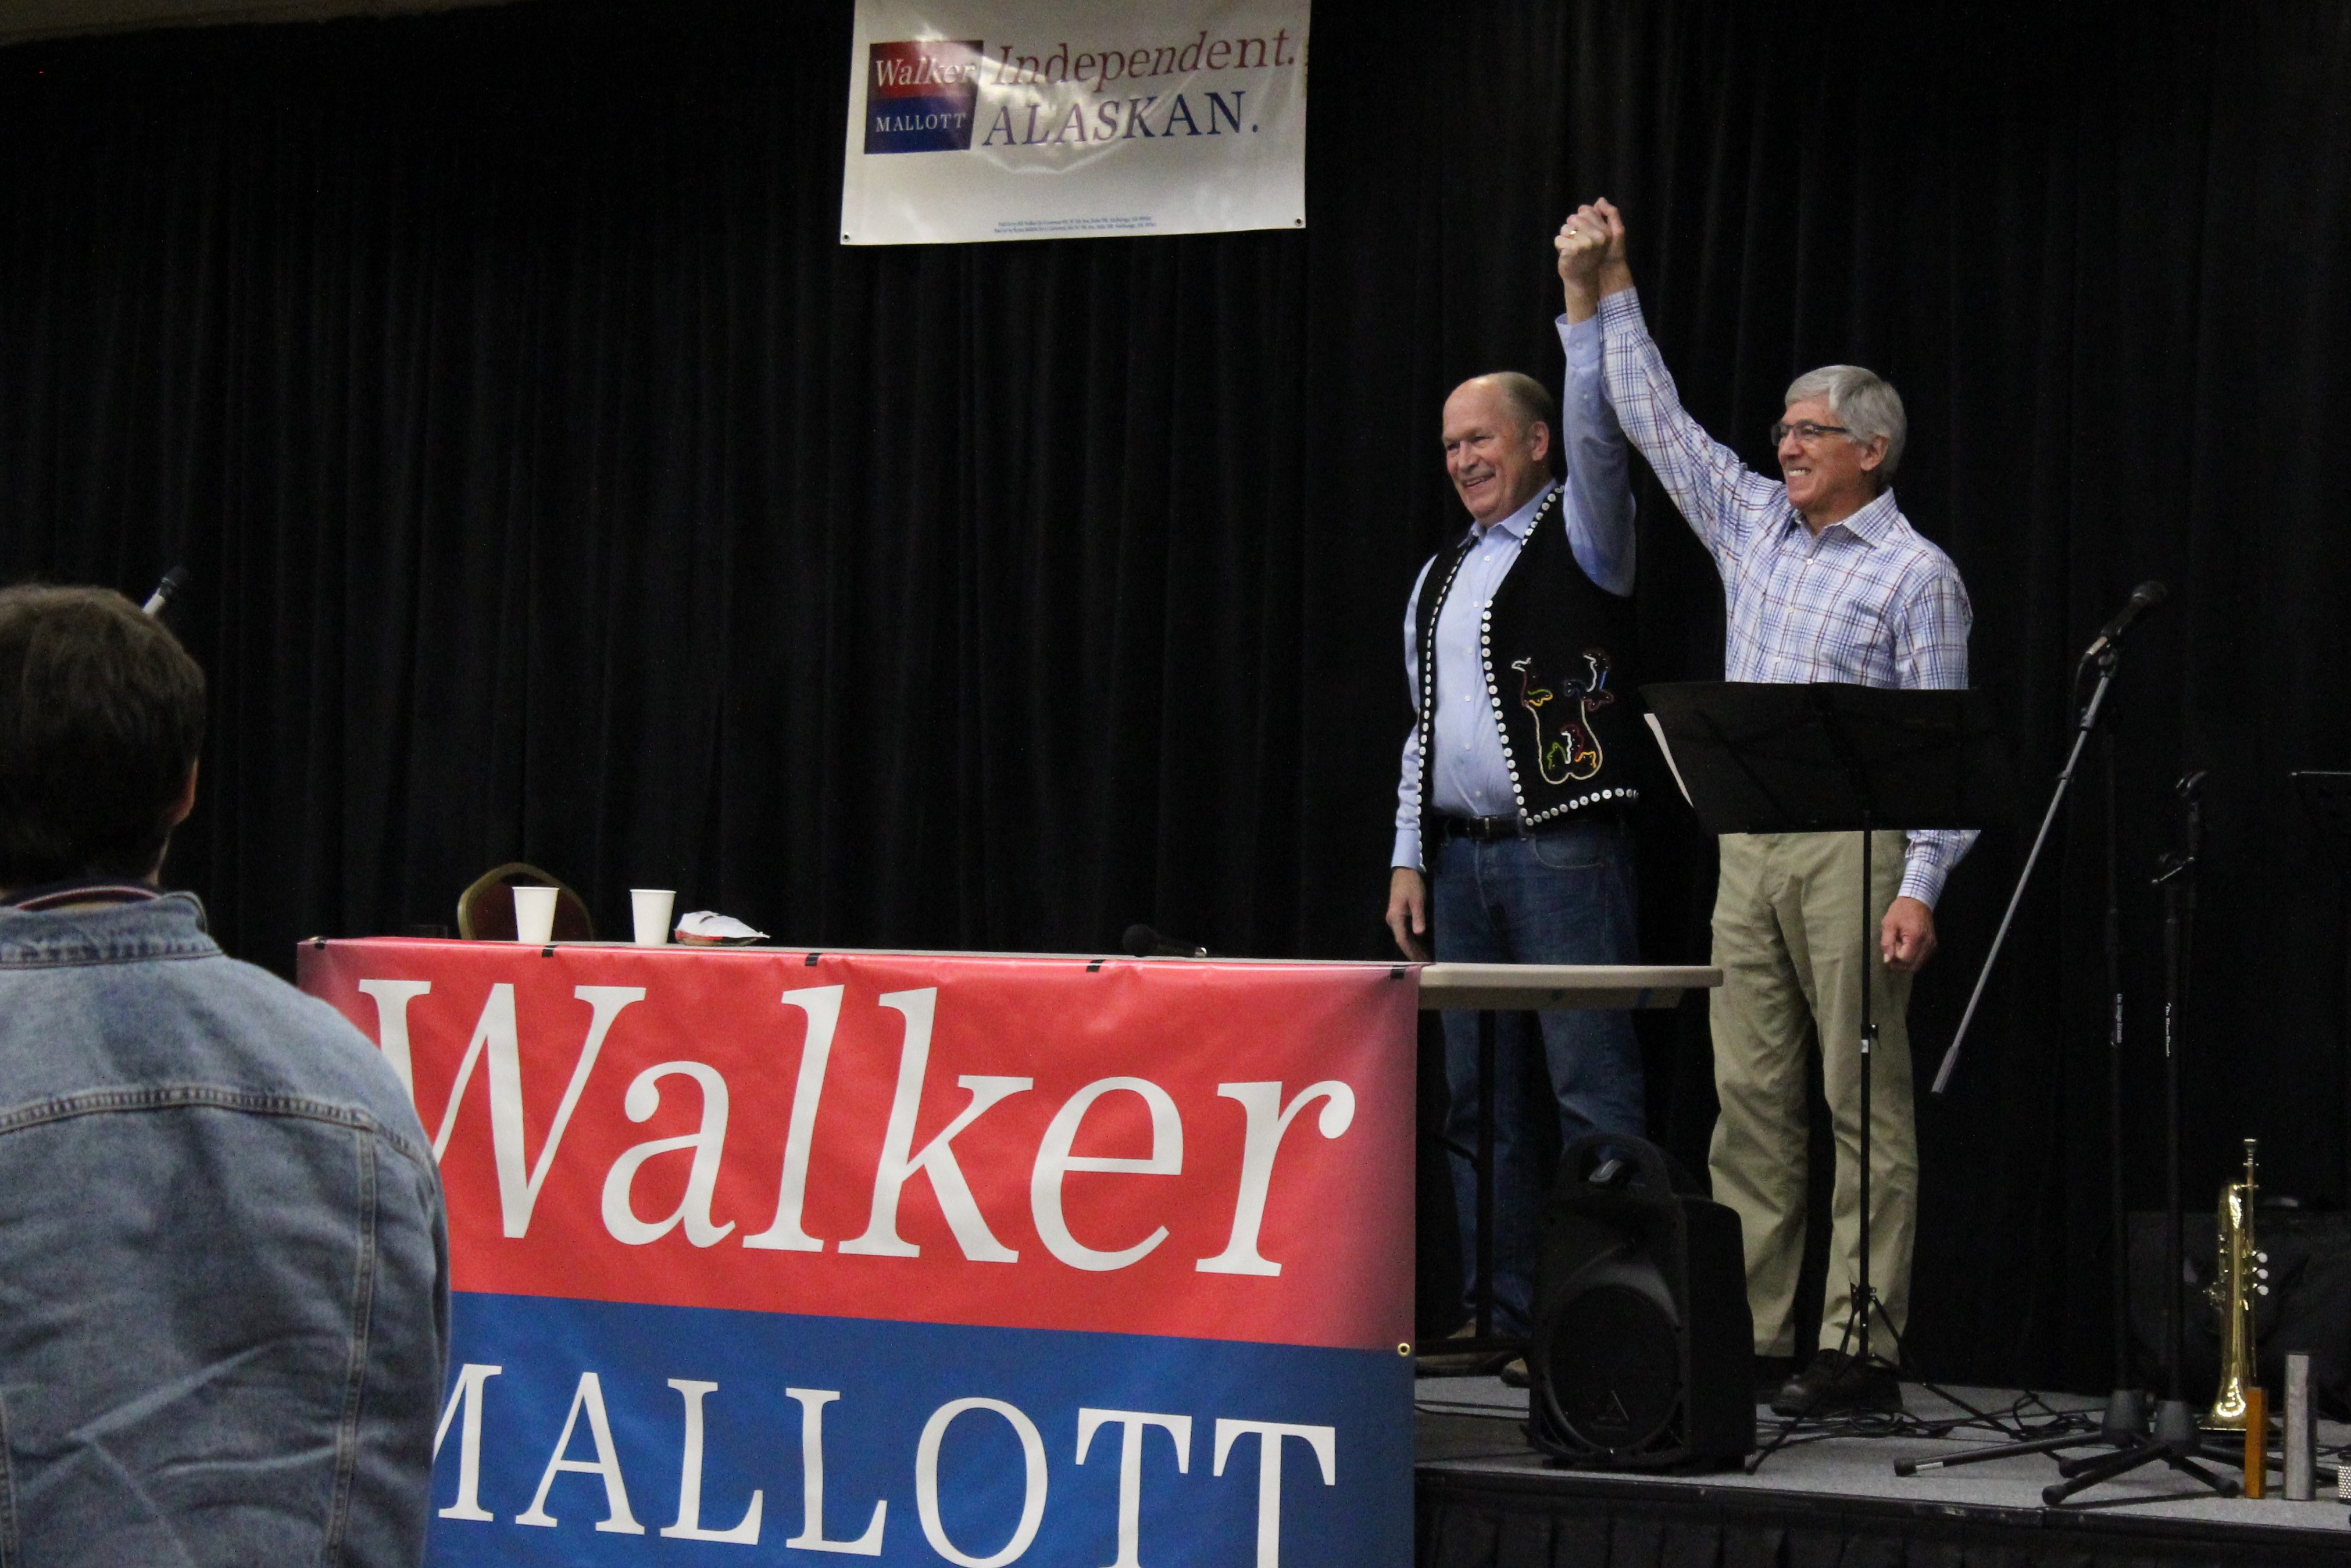 Q&A: On re-election bid, Gov. Walker says he's made difficult decisions ...